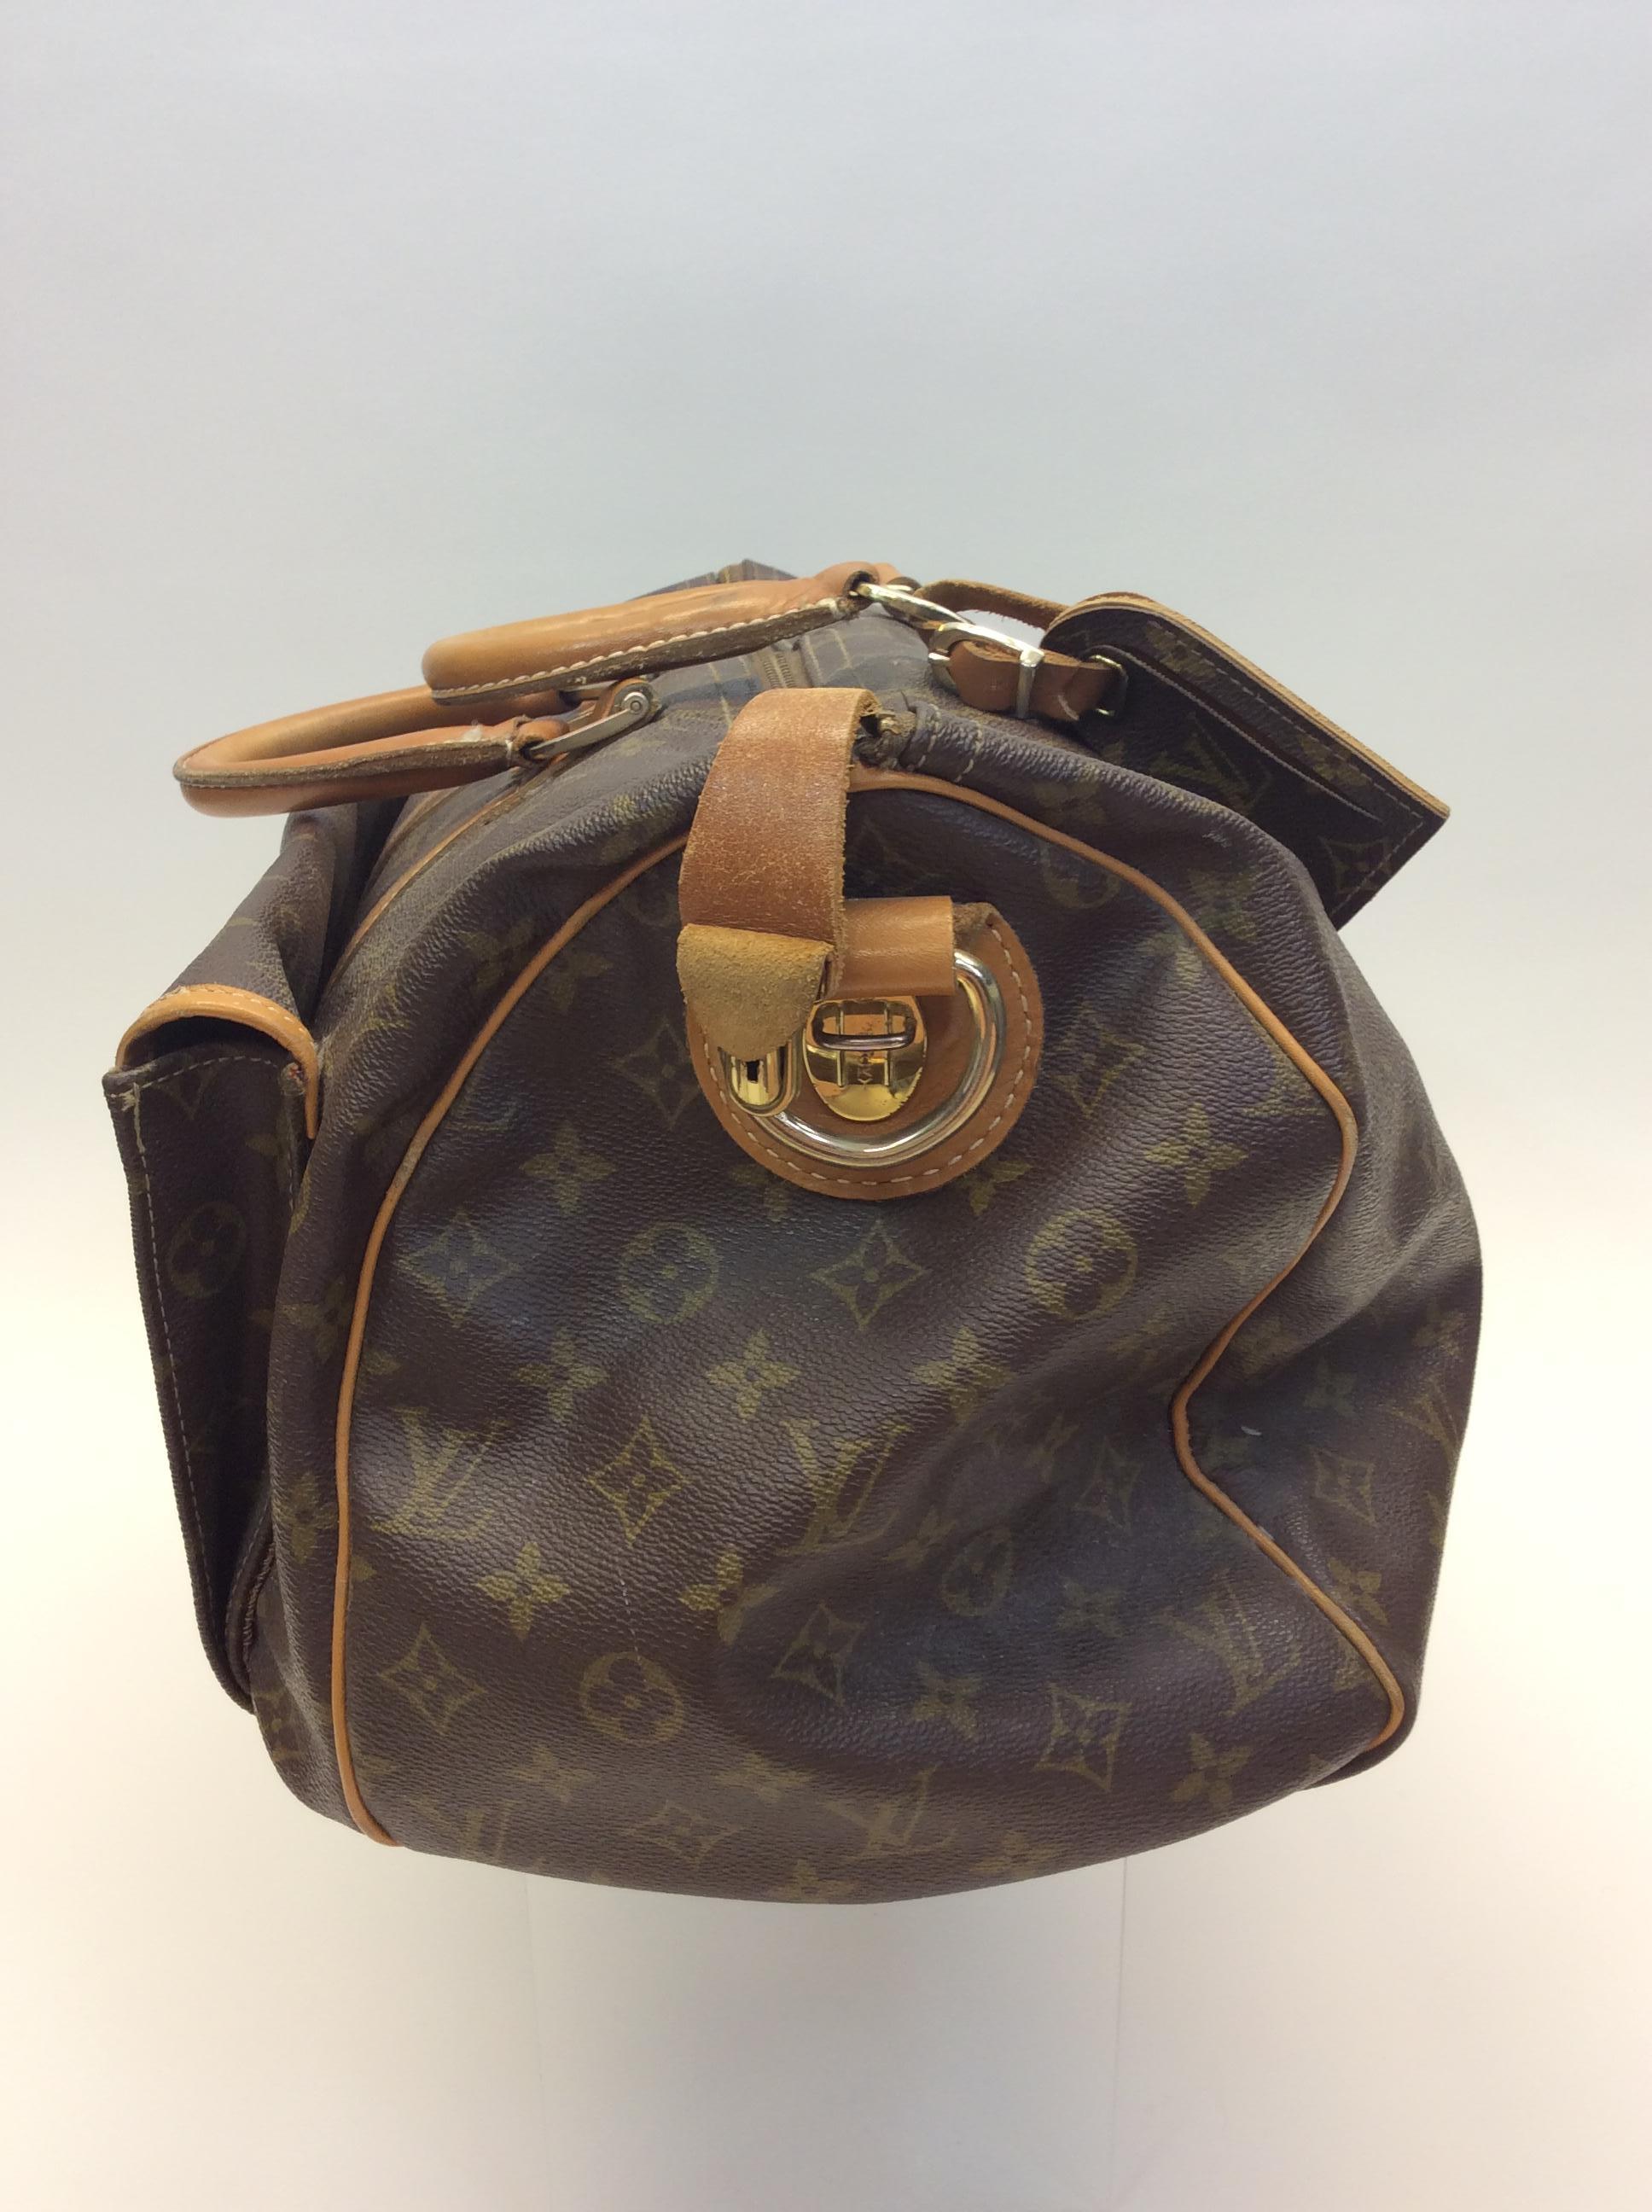 Louis Vuitton Brown Monogram Vintage Satchel In Good Condition For Sale In Narberth, PA